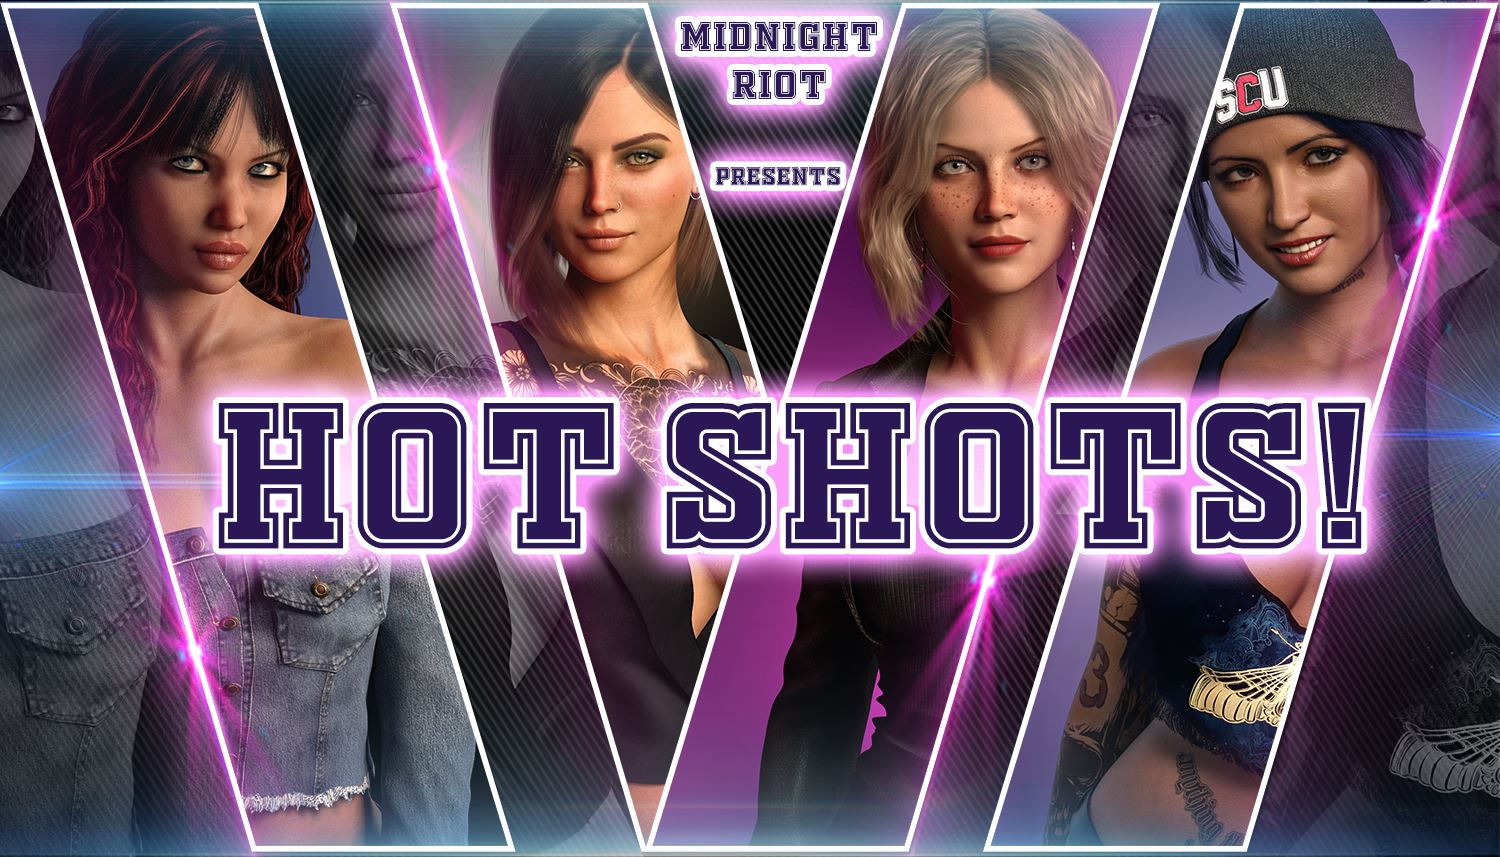 Ren'Py] Hot Shots! - v0.1.2a by Midnight Riot 18+ Adult xxx Porn Game  Download